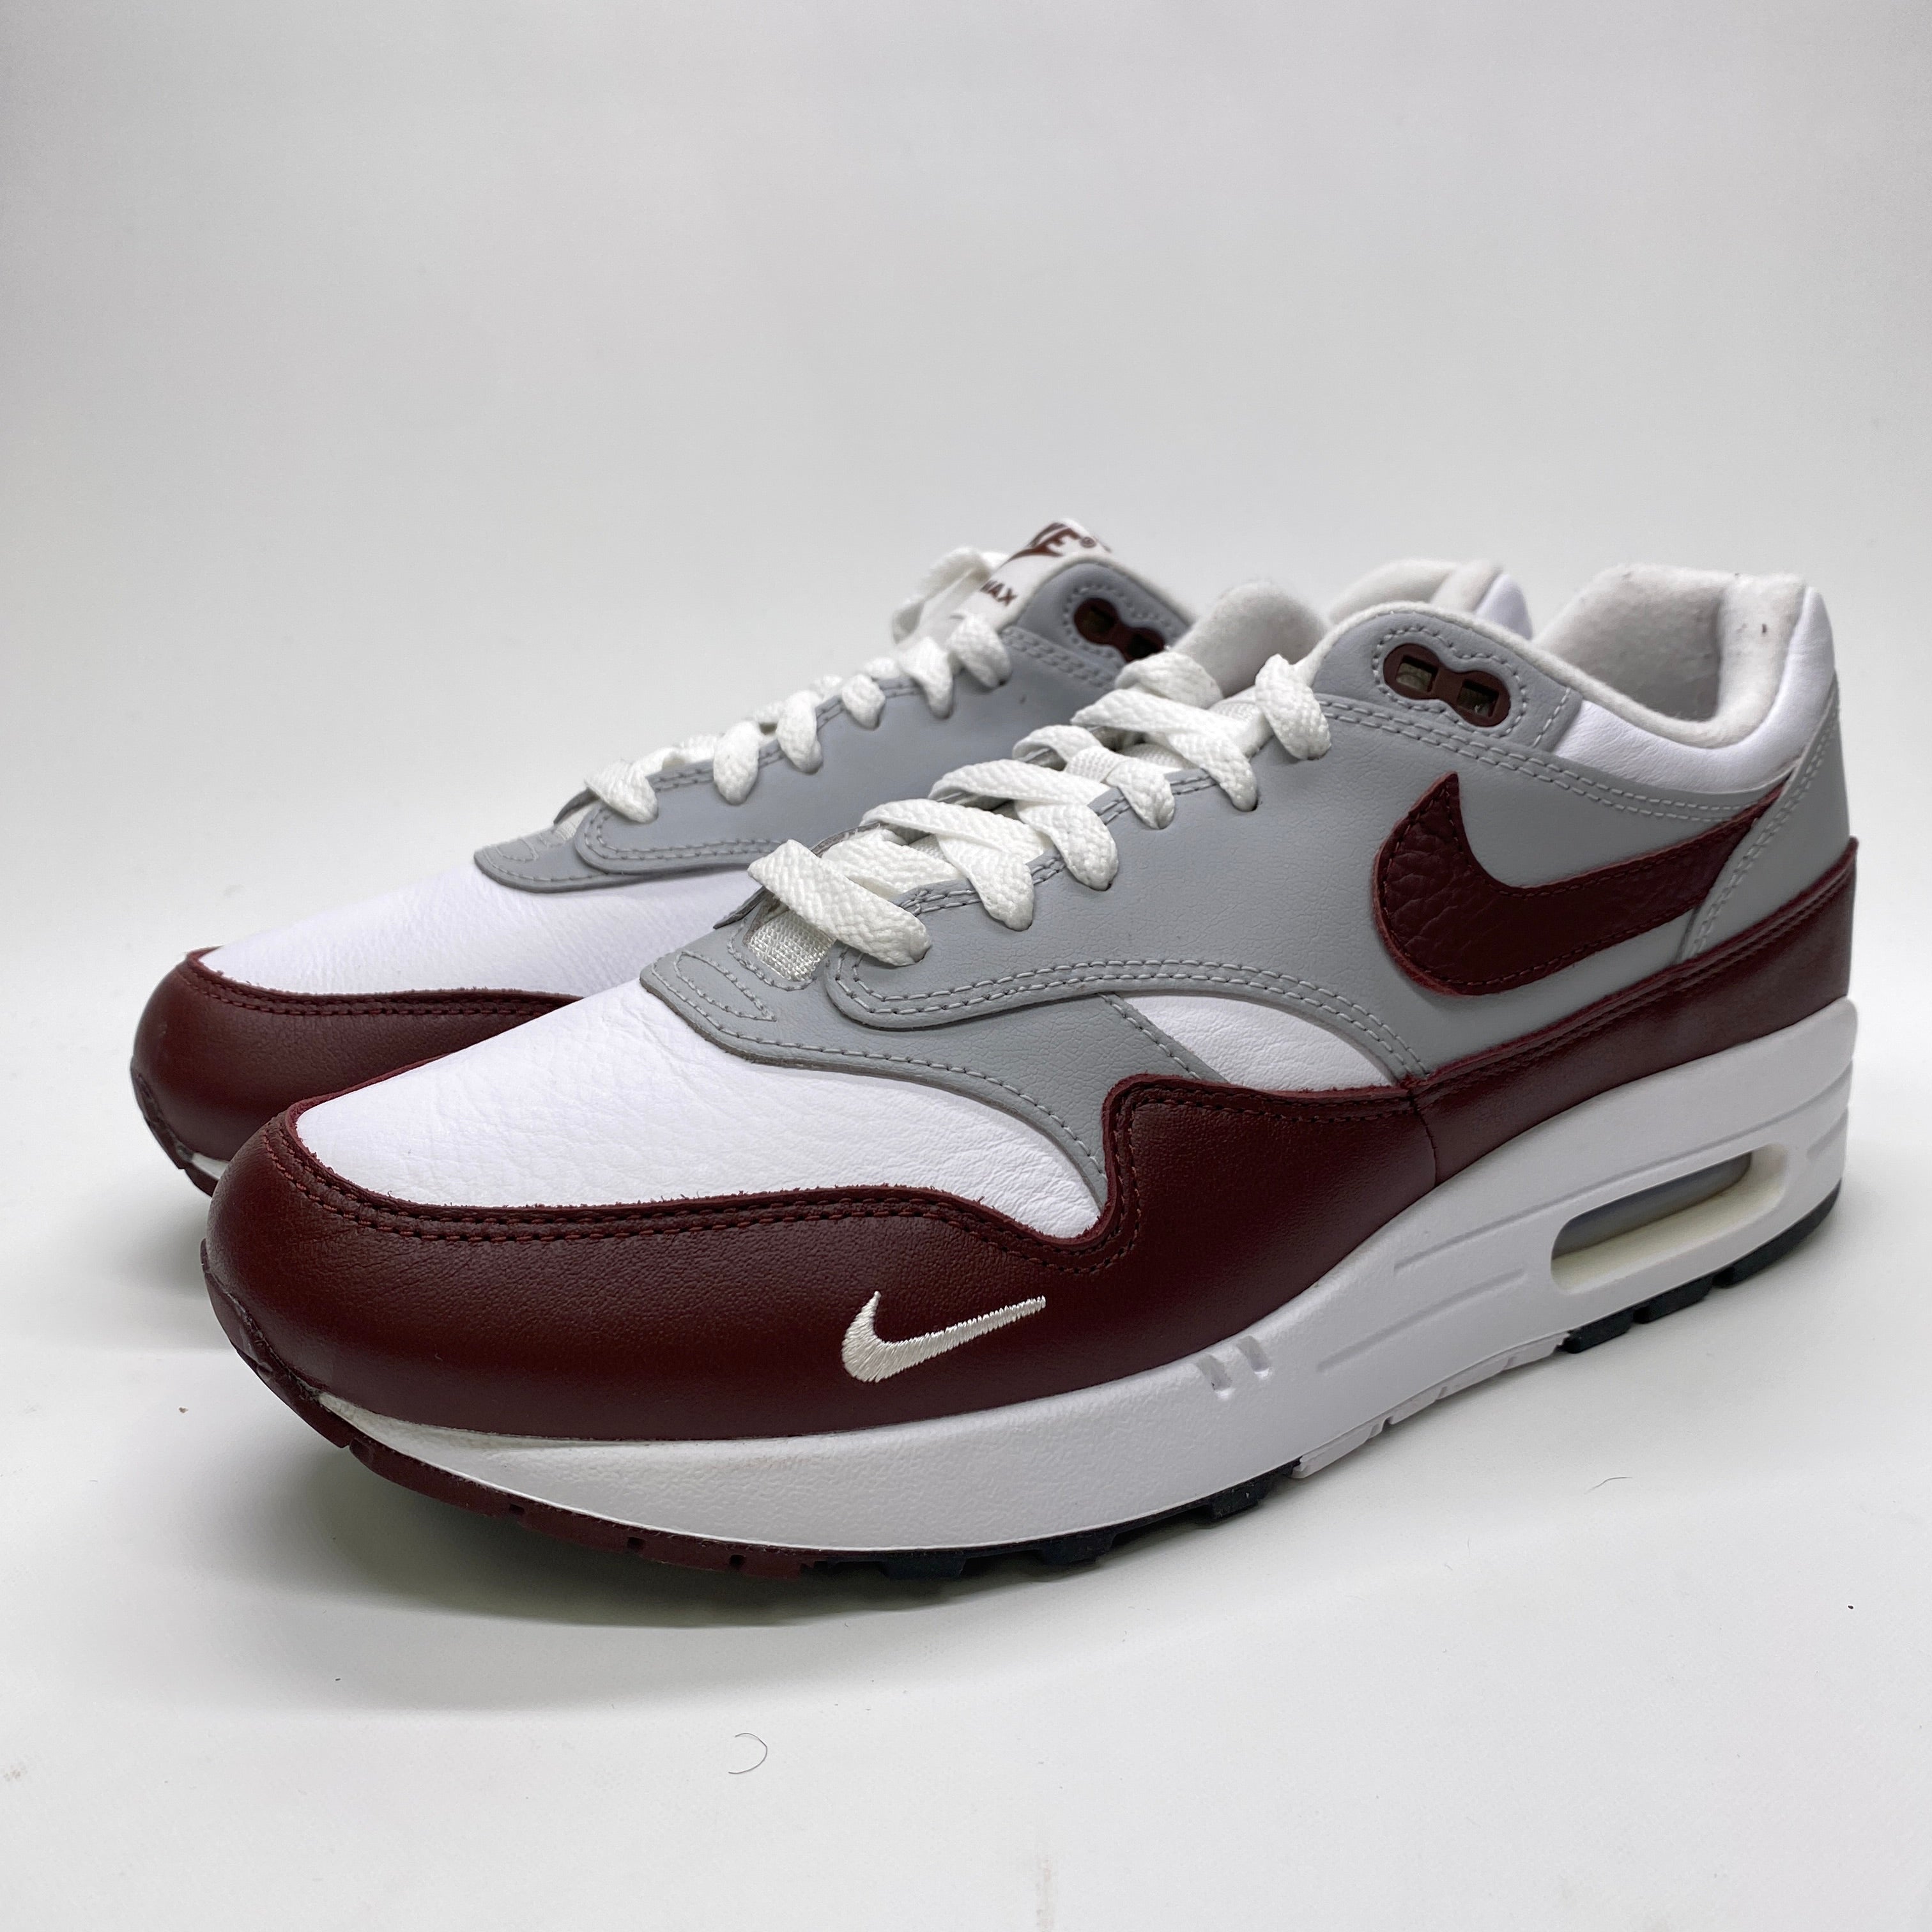 Nike Air Max 1 &quot;Mystic Dates&quot; 2020 Used Size 9.5